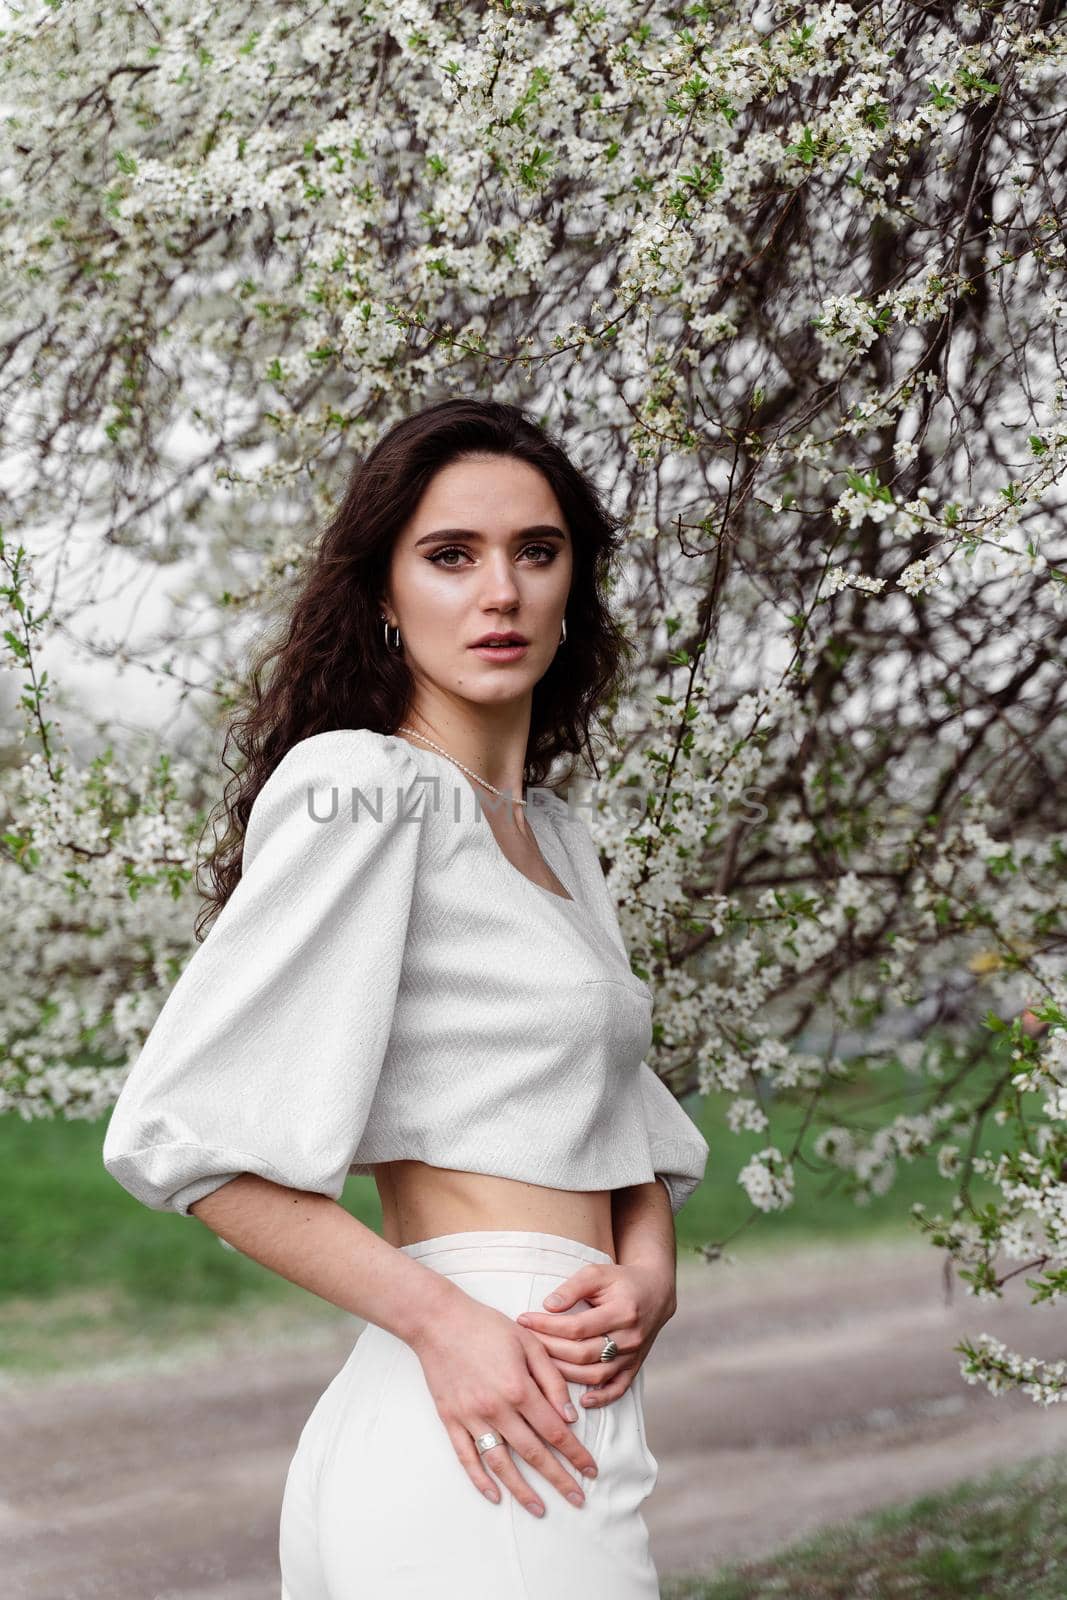 Portrait of young woman in the garden. Attractive girl weared white dress posing near blooming trees